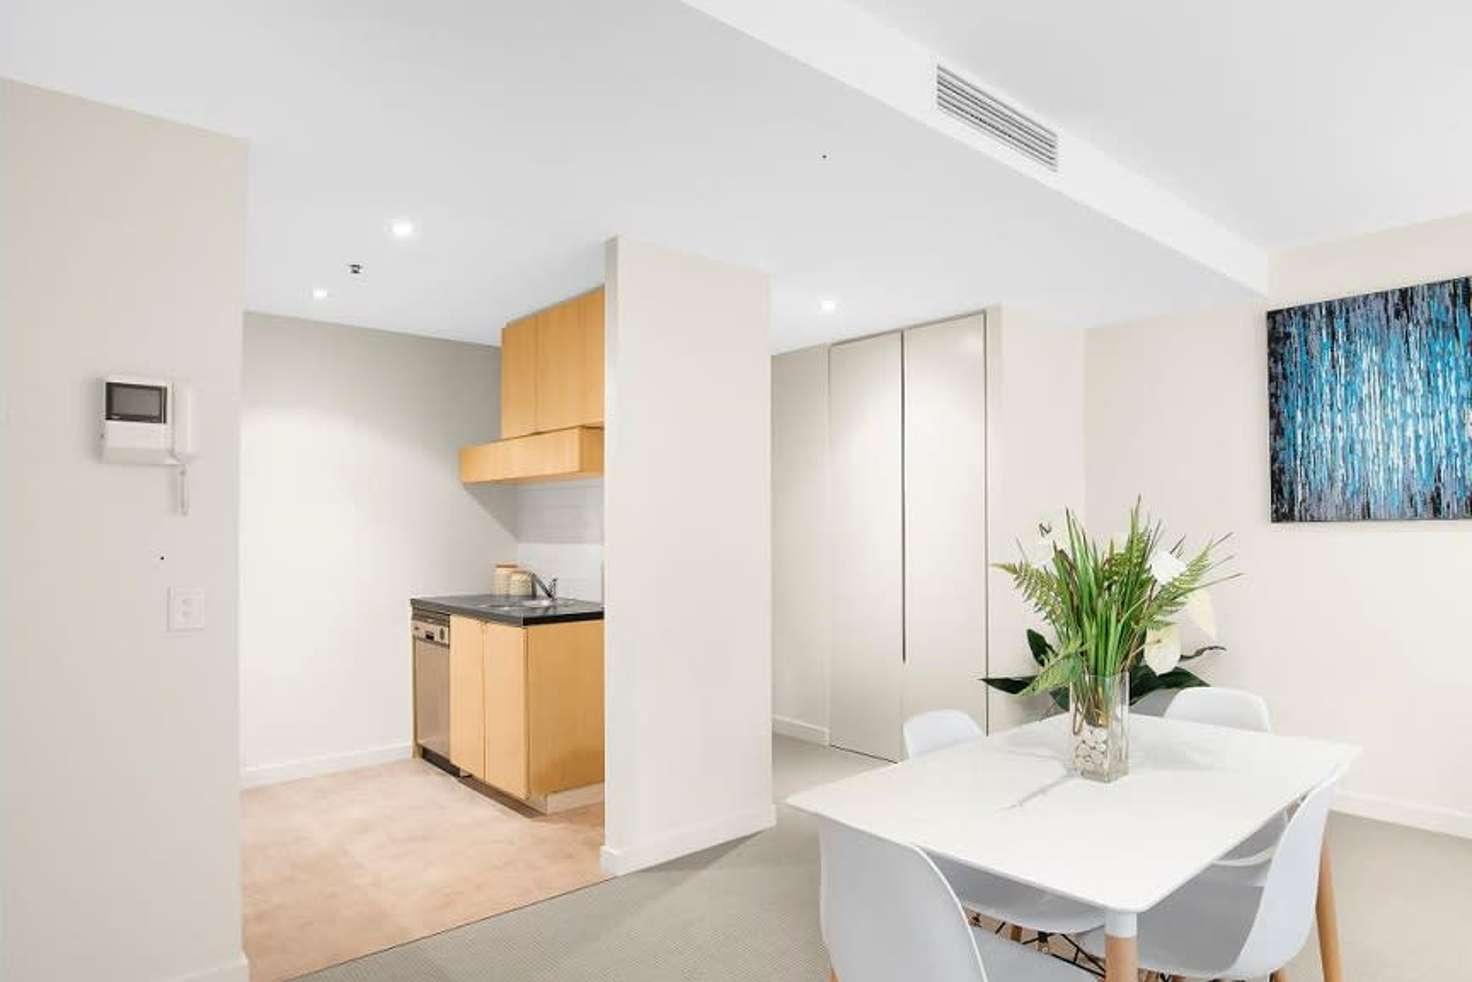 Main view of Homely apartment listing, 1014/24 Jane Bell Lane, Melbourne VIC 3000